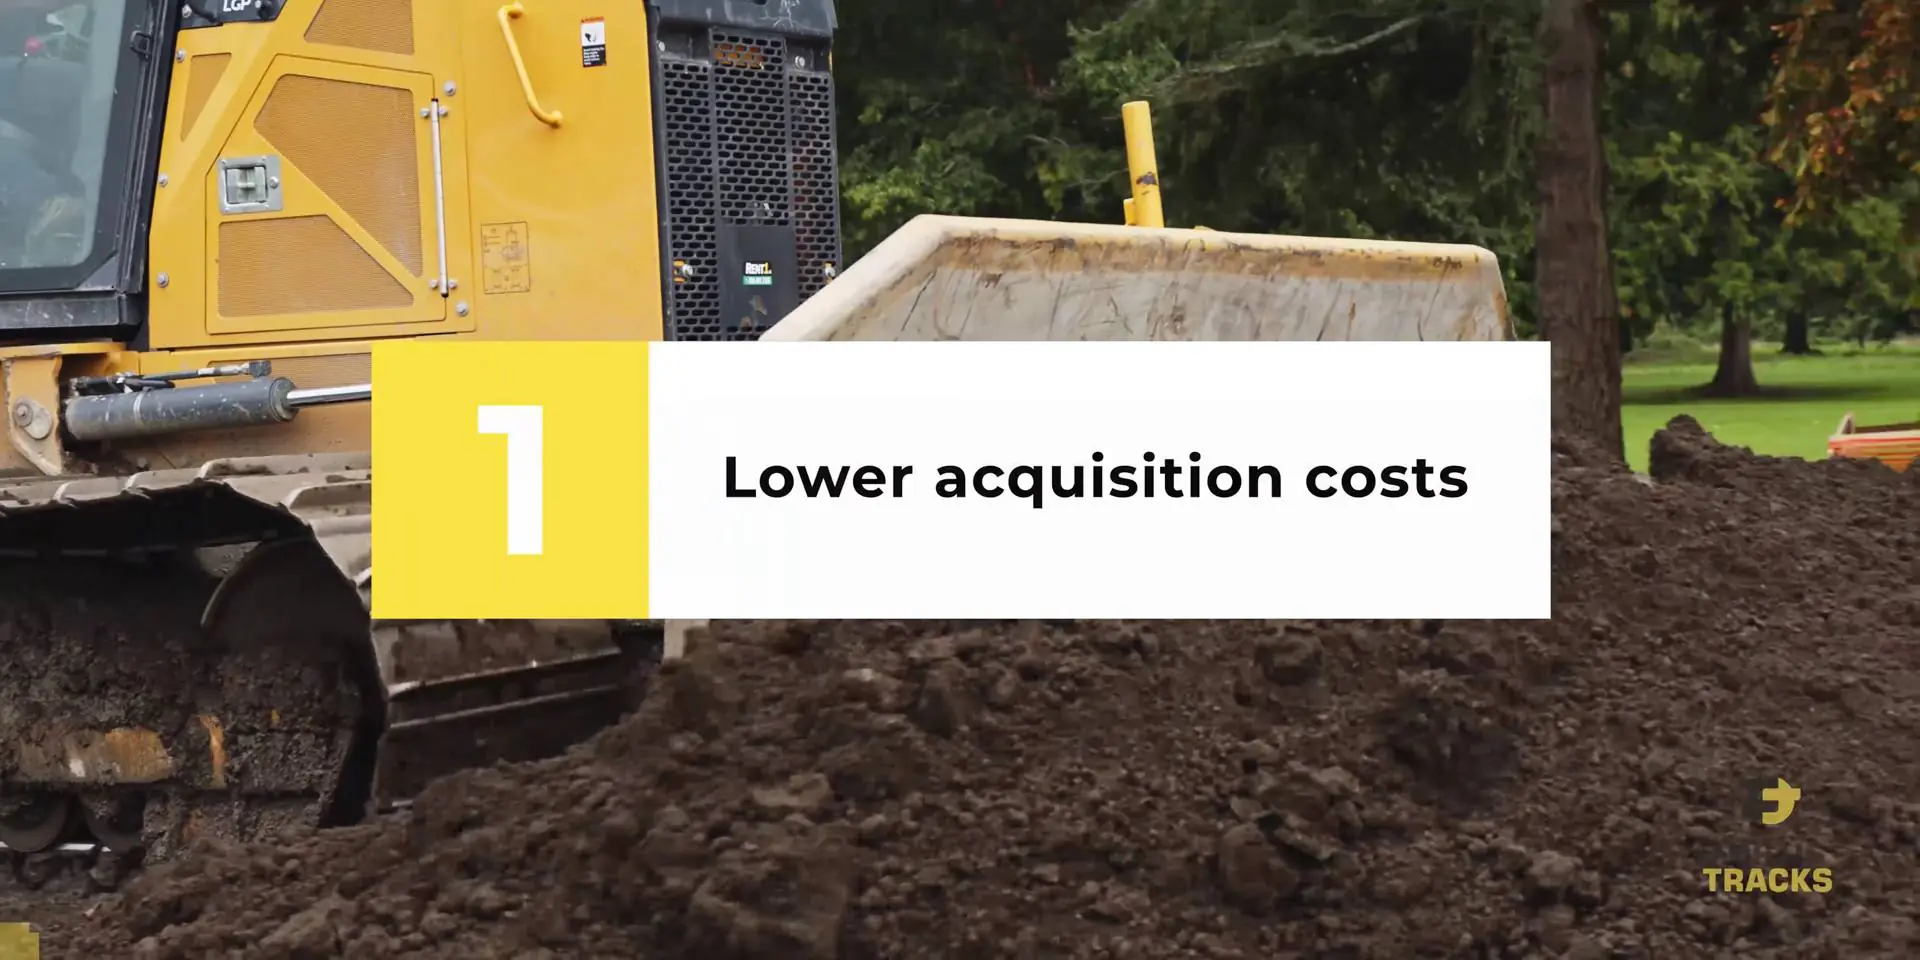 earth moving vehicle shovelling dirt with a caption that says "lower acquisition costs"